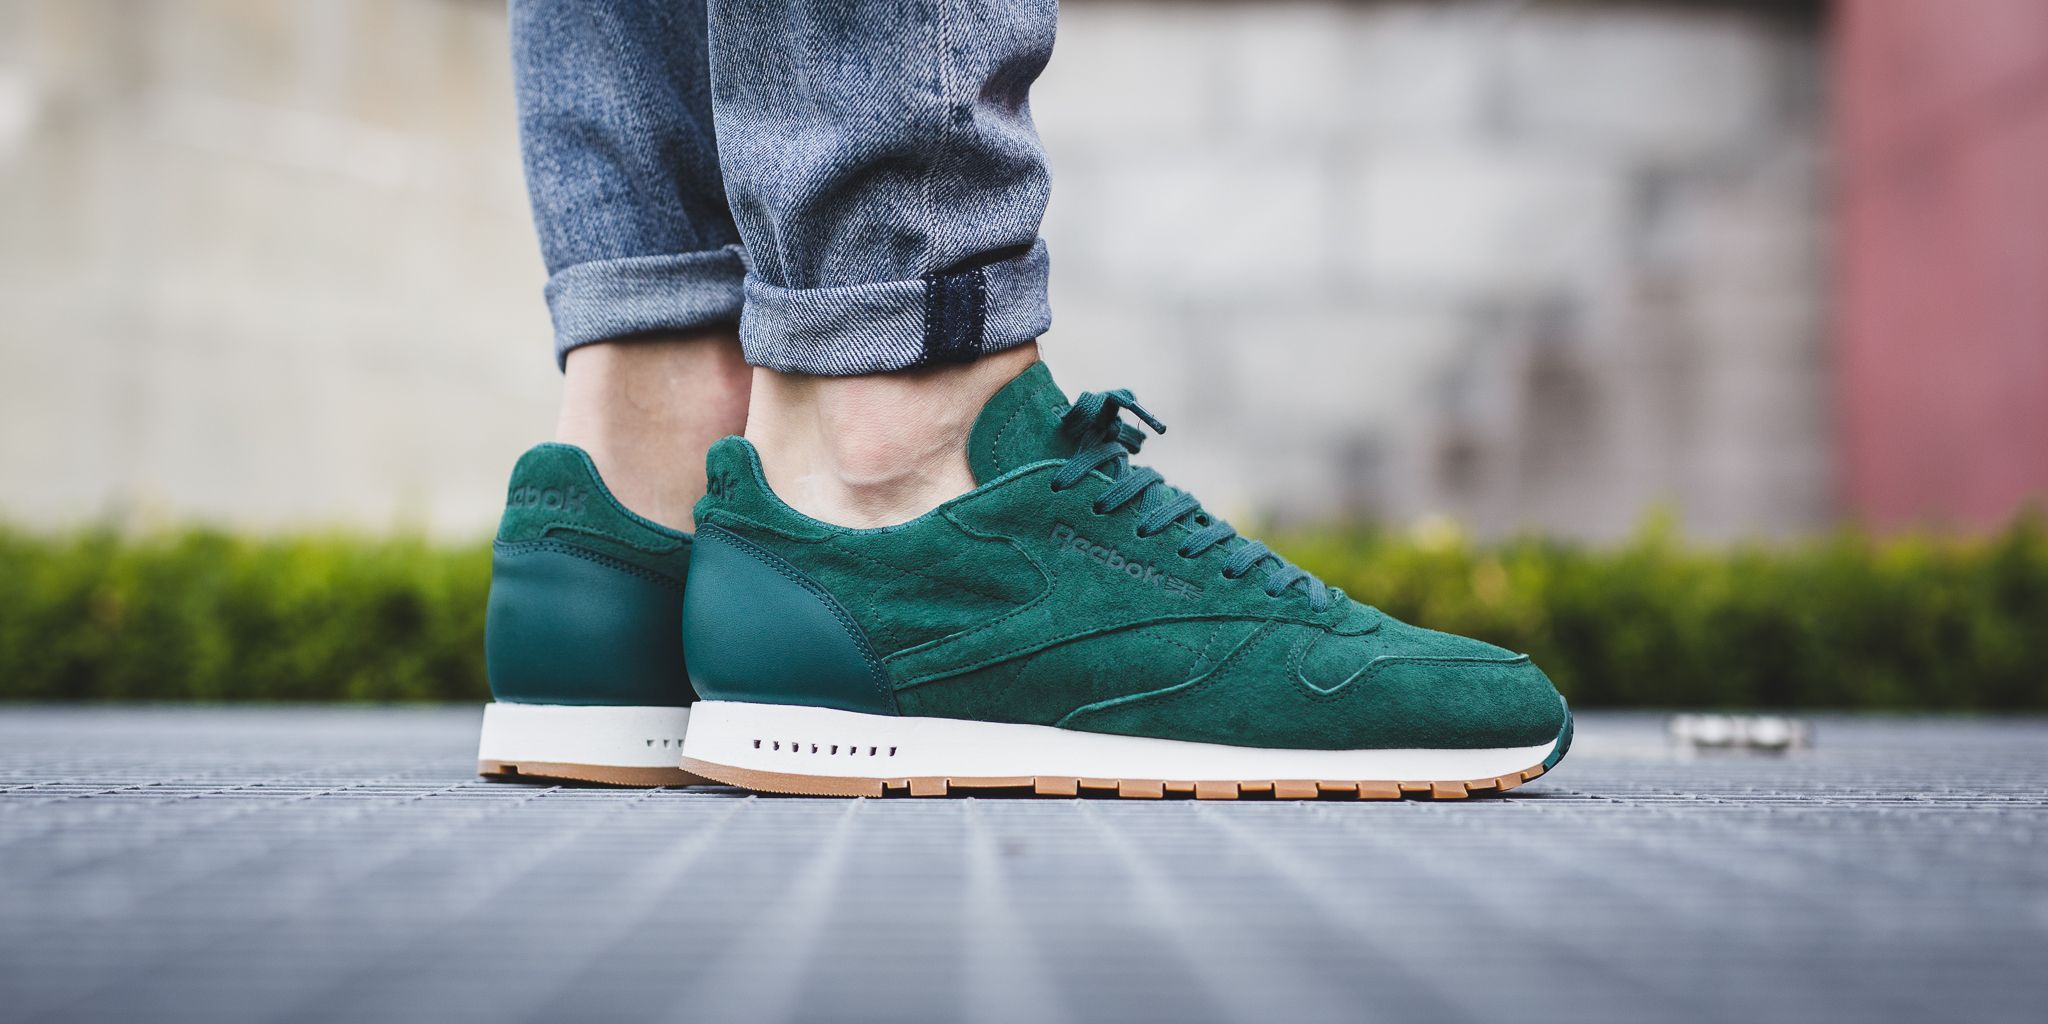 Titolo on Twitter: "NEW IN! Reebok Classic Leather Sg - Washed Jade/Chalk-Gum SHOP HERE: https://t.co/YcuwdKkBMO / Twitter